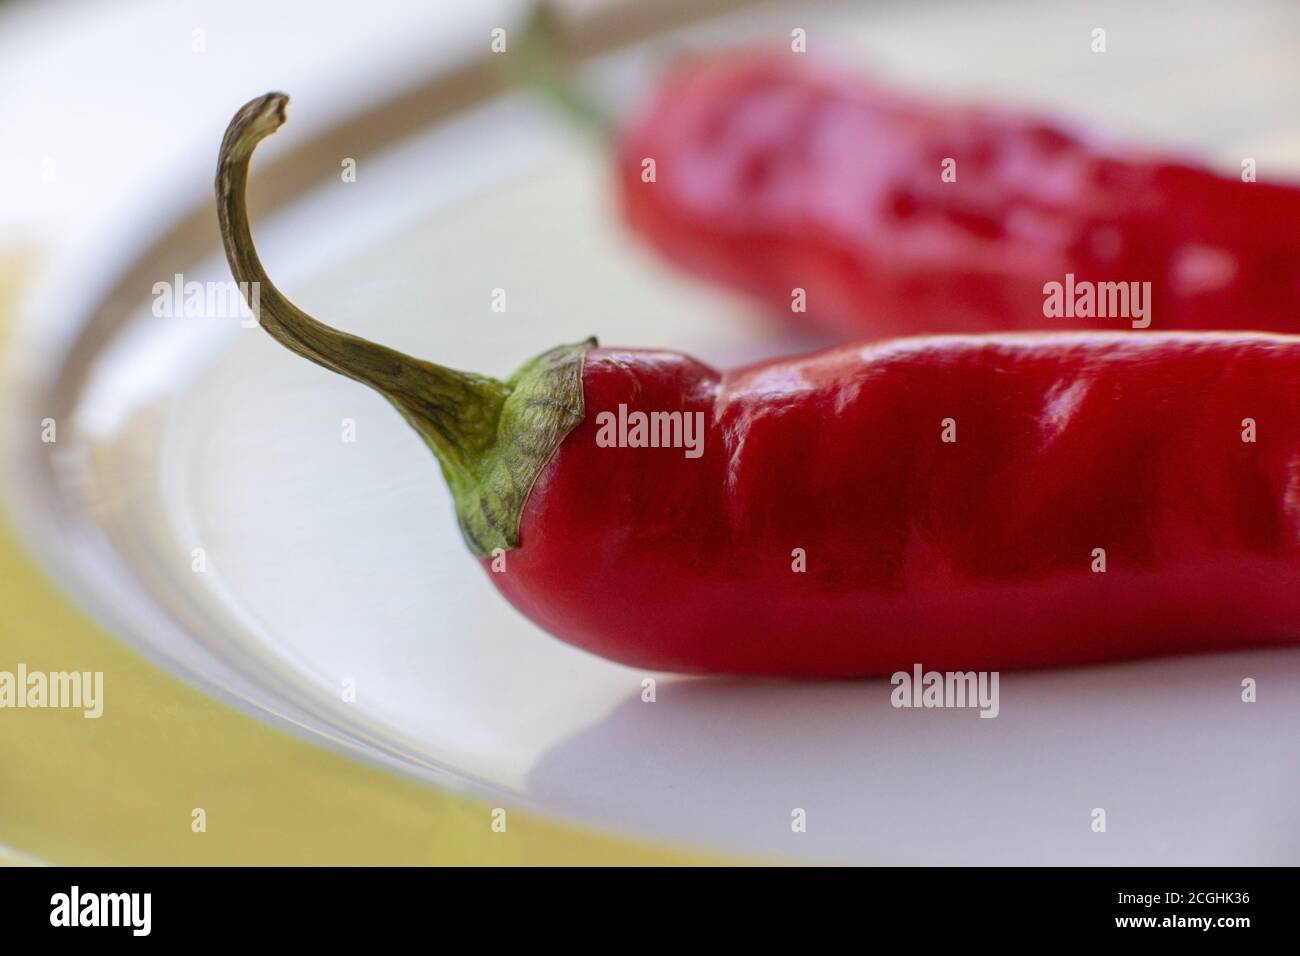 Sweet red bell peppers – capsicum annuum – drying on a plate in preparation for freezing. Stock Photo